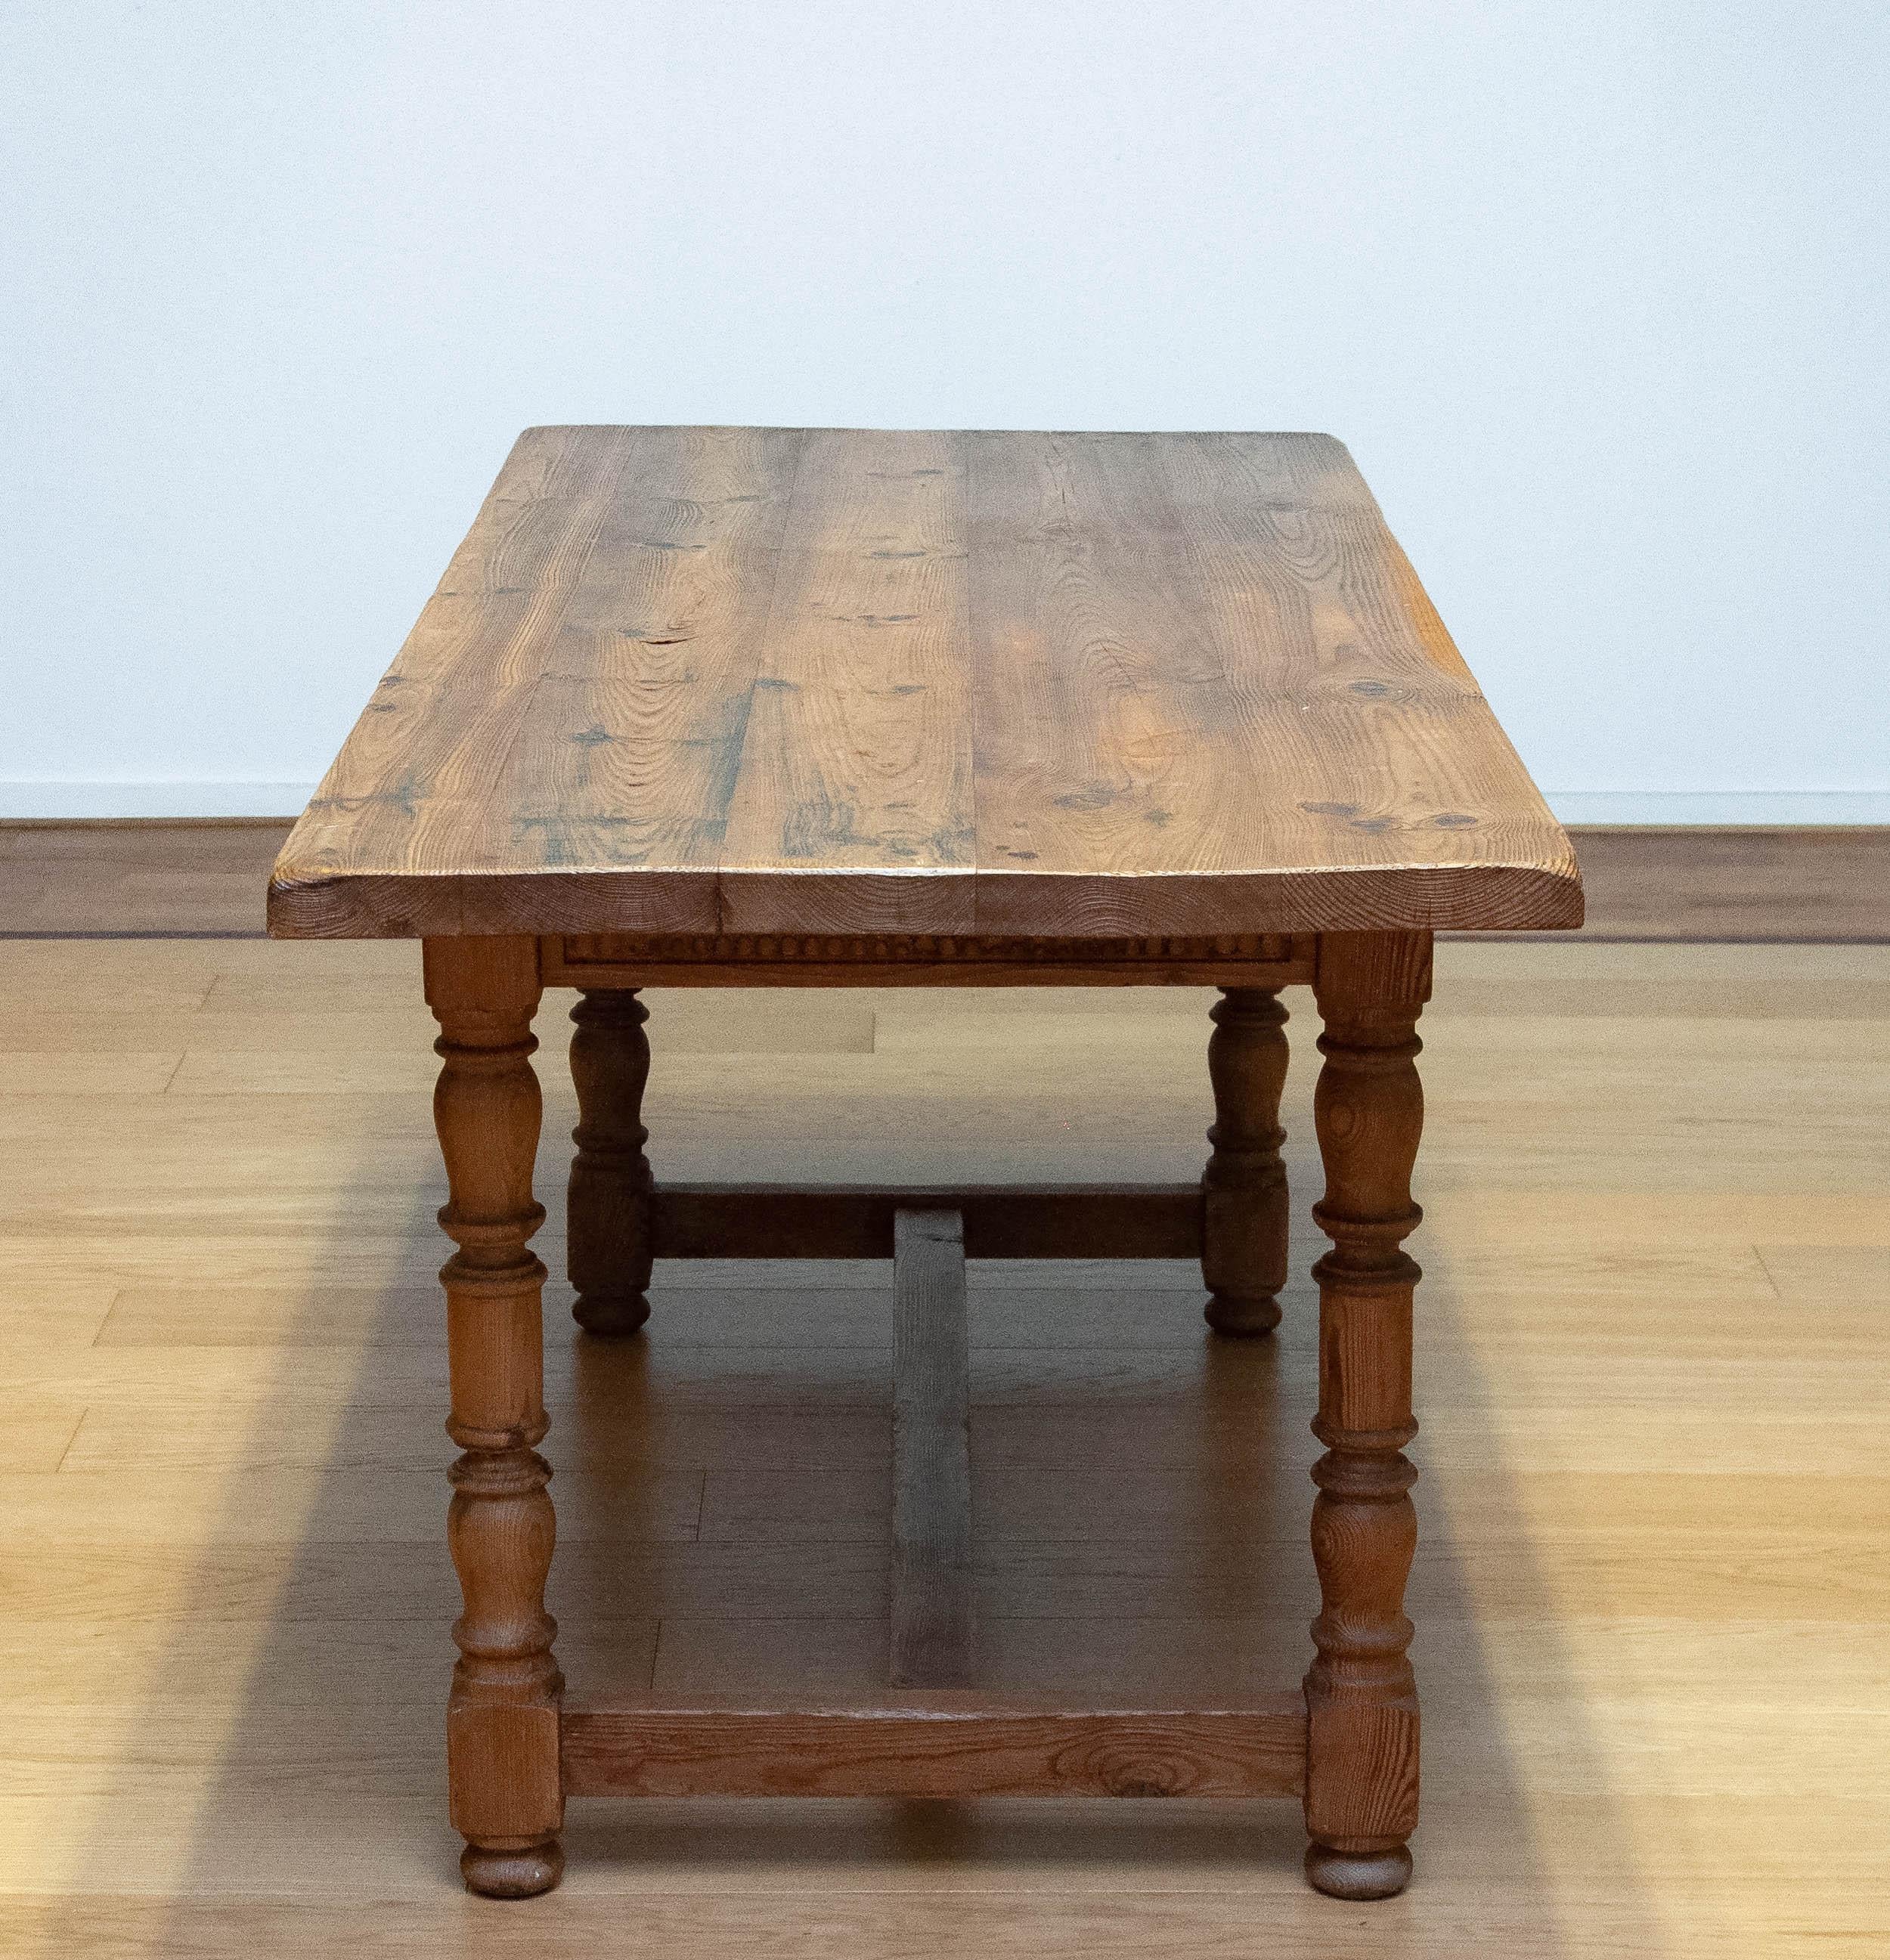 Late 19th Century Antique Swedish Folk Art Farm Country Dining Table In Pine In Good Condition For Sale In Silvolde, Gelderland